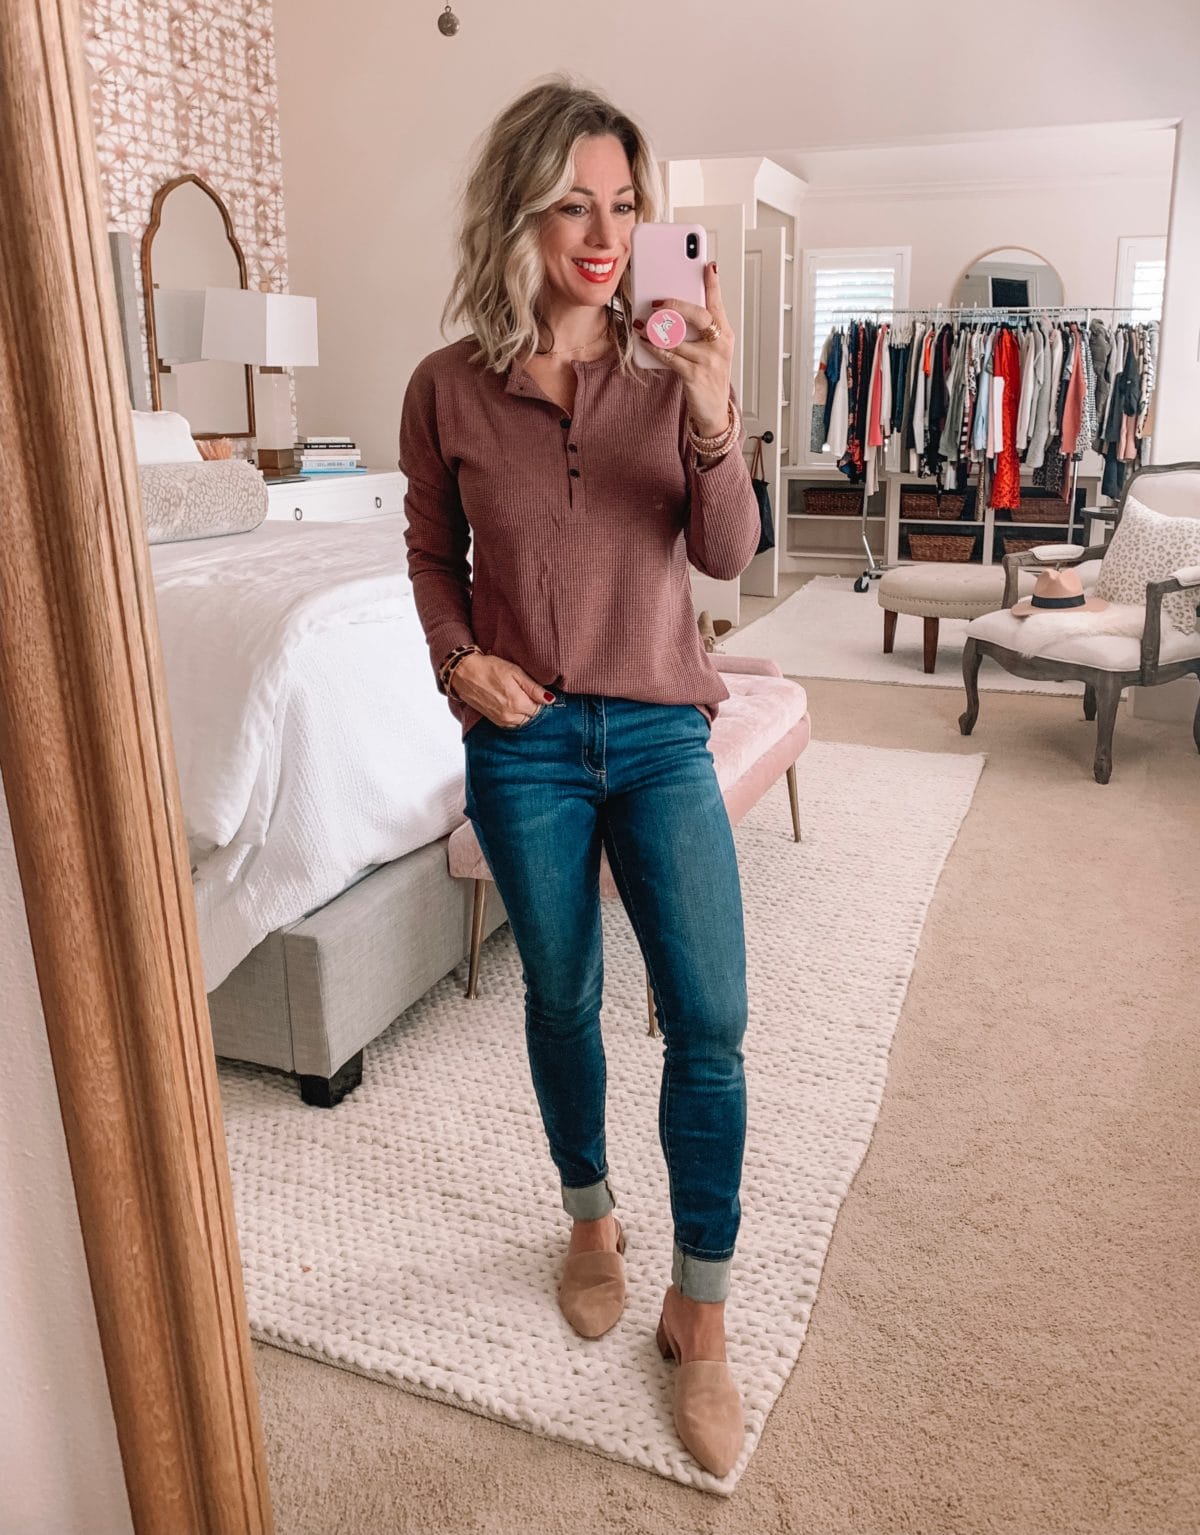 Amazon Prime Fashion- Henley Top and Jeans 